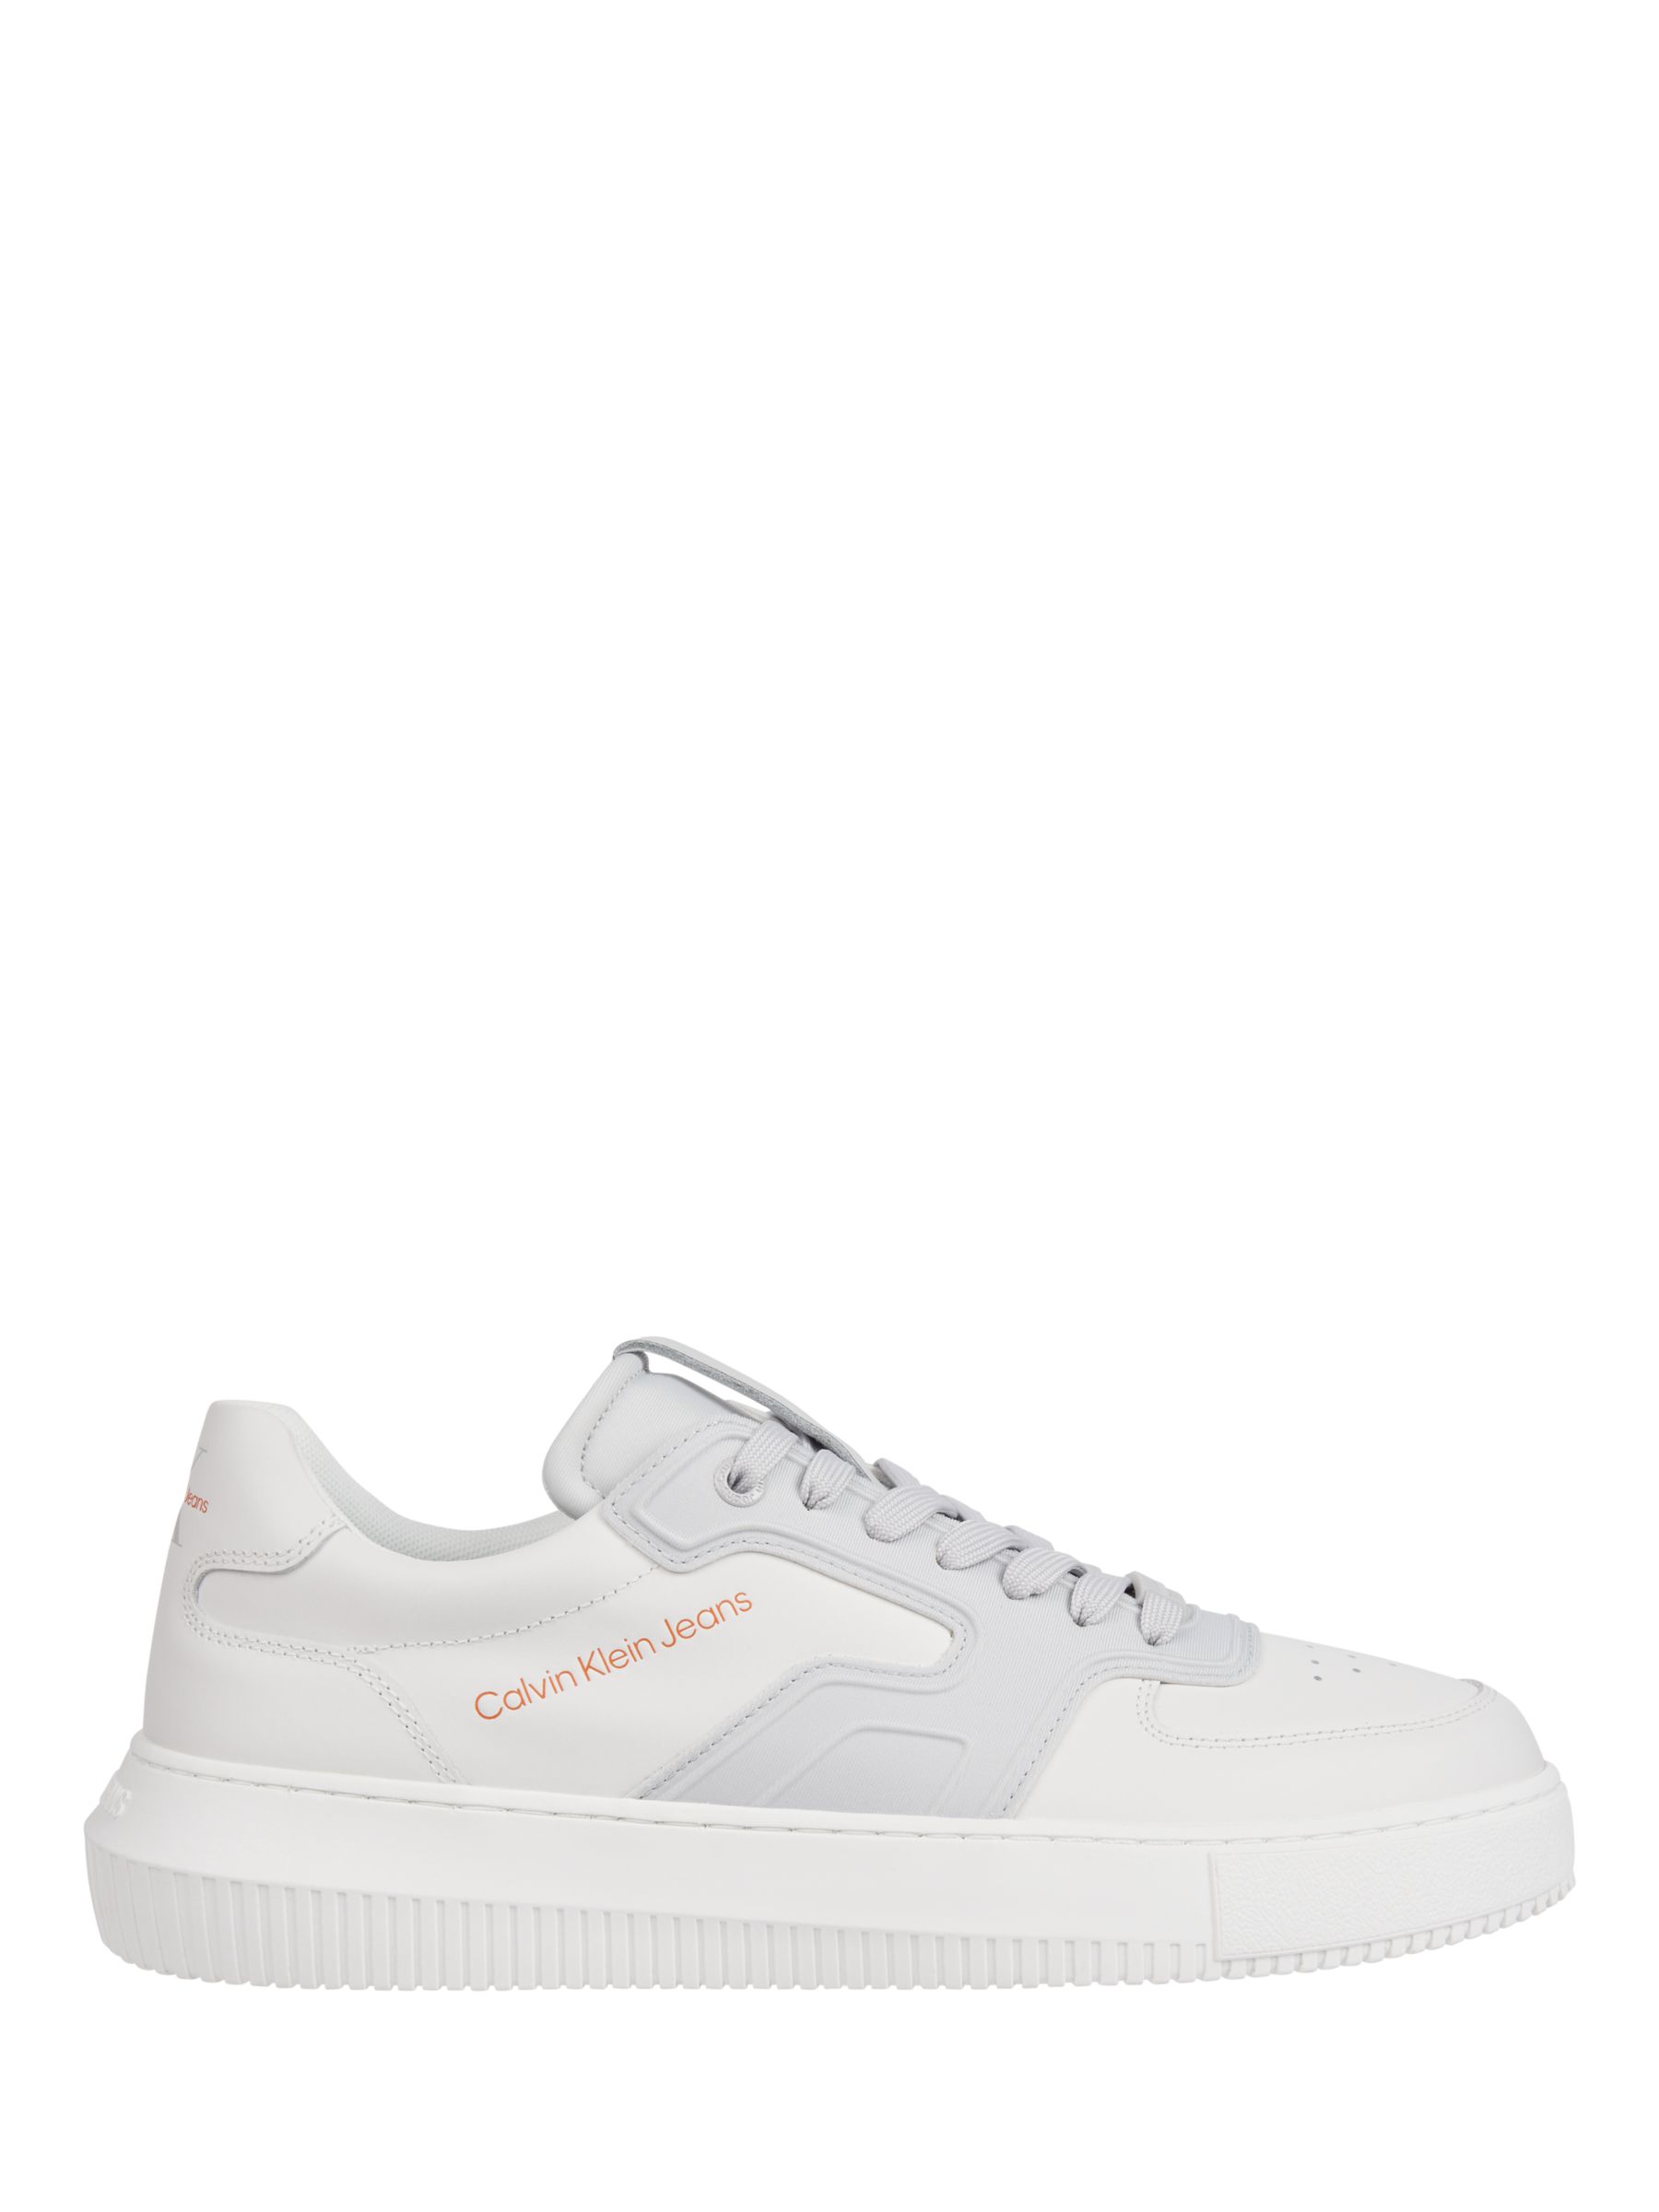 Buy Calvin Klein Leather Lace Up Chunky Cupsole Trainers, White/Oyster Online at johnlewis.com